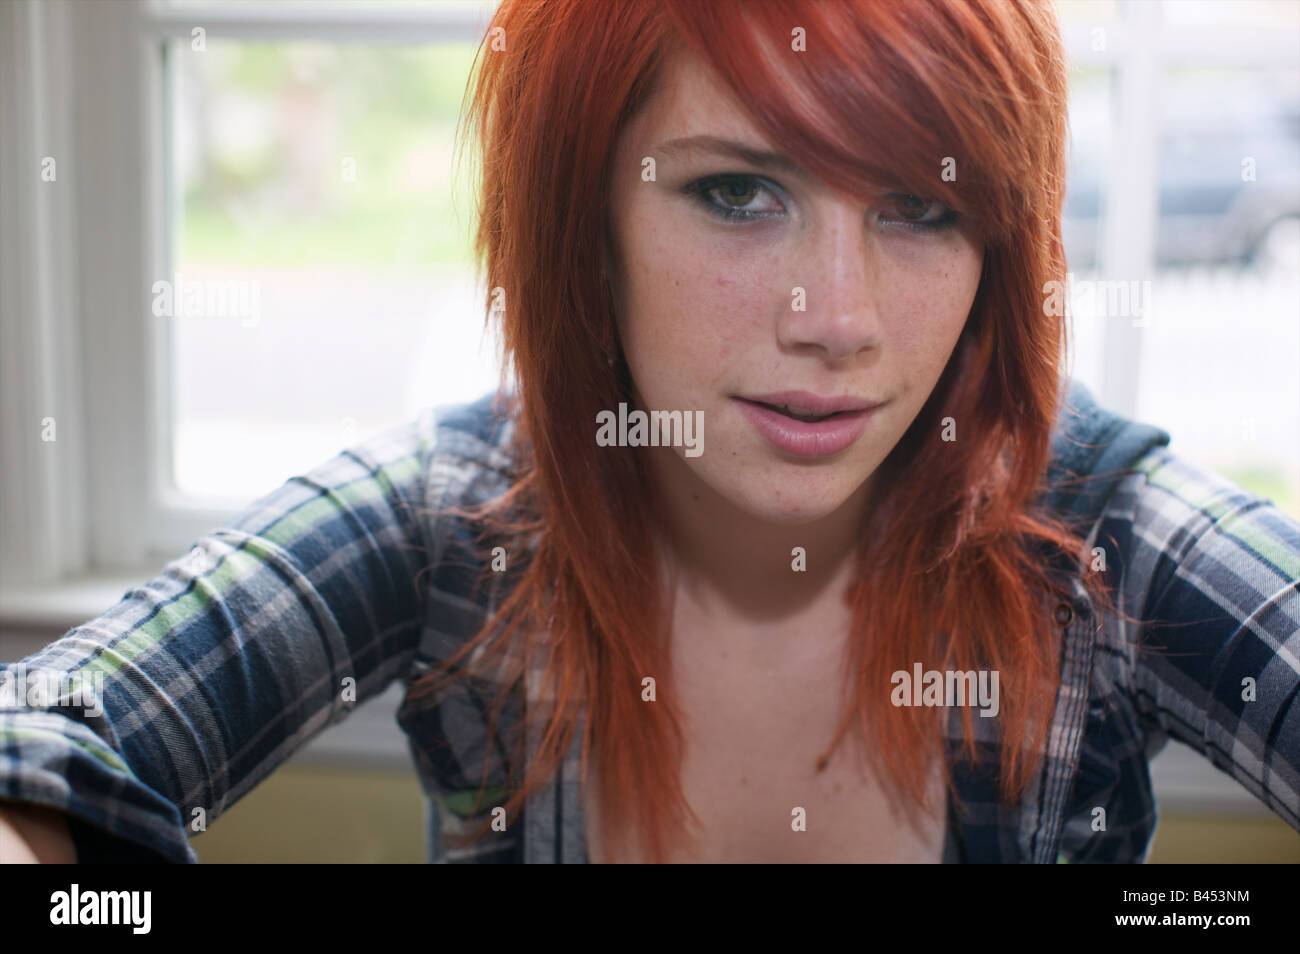 Cute teenager with freshly dyed orange hair take a self portrait of herself in flannel and tank top. Stock Photo